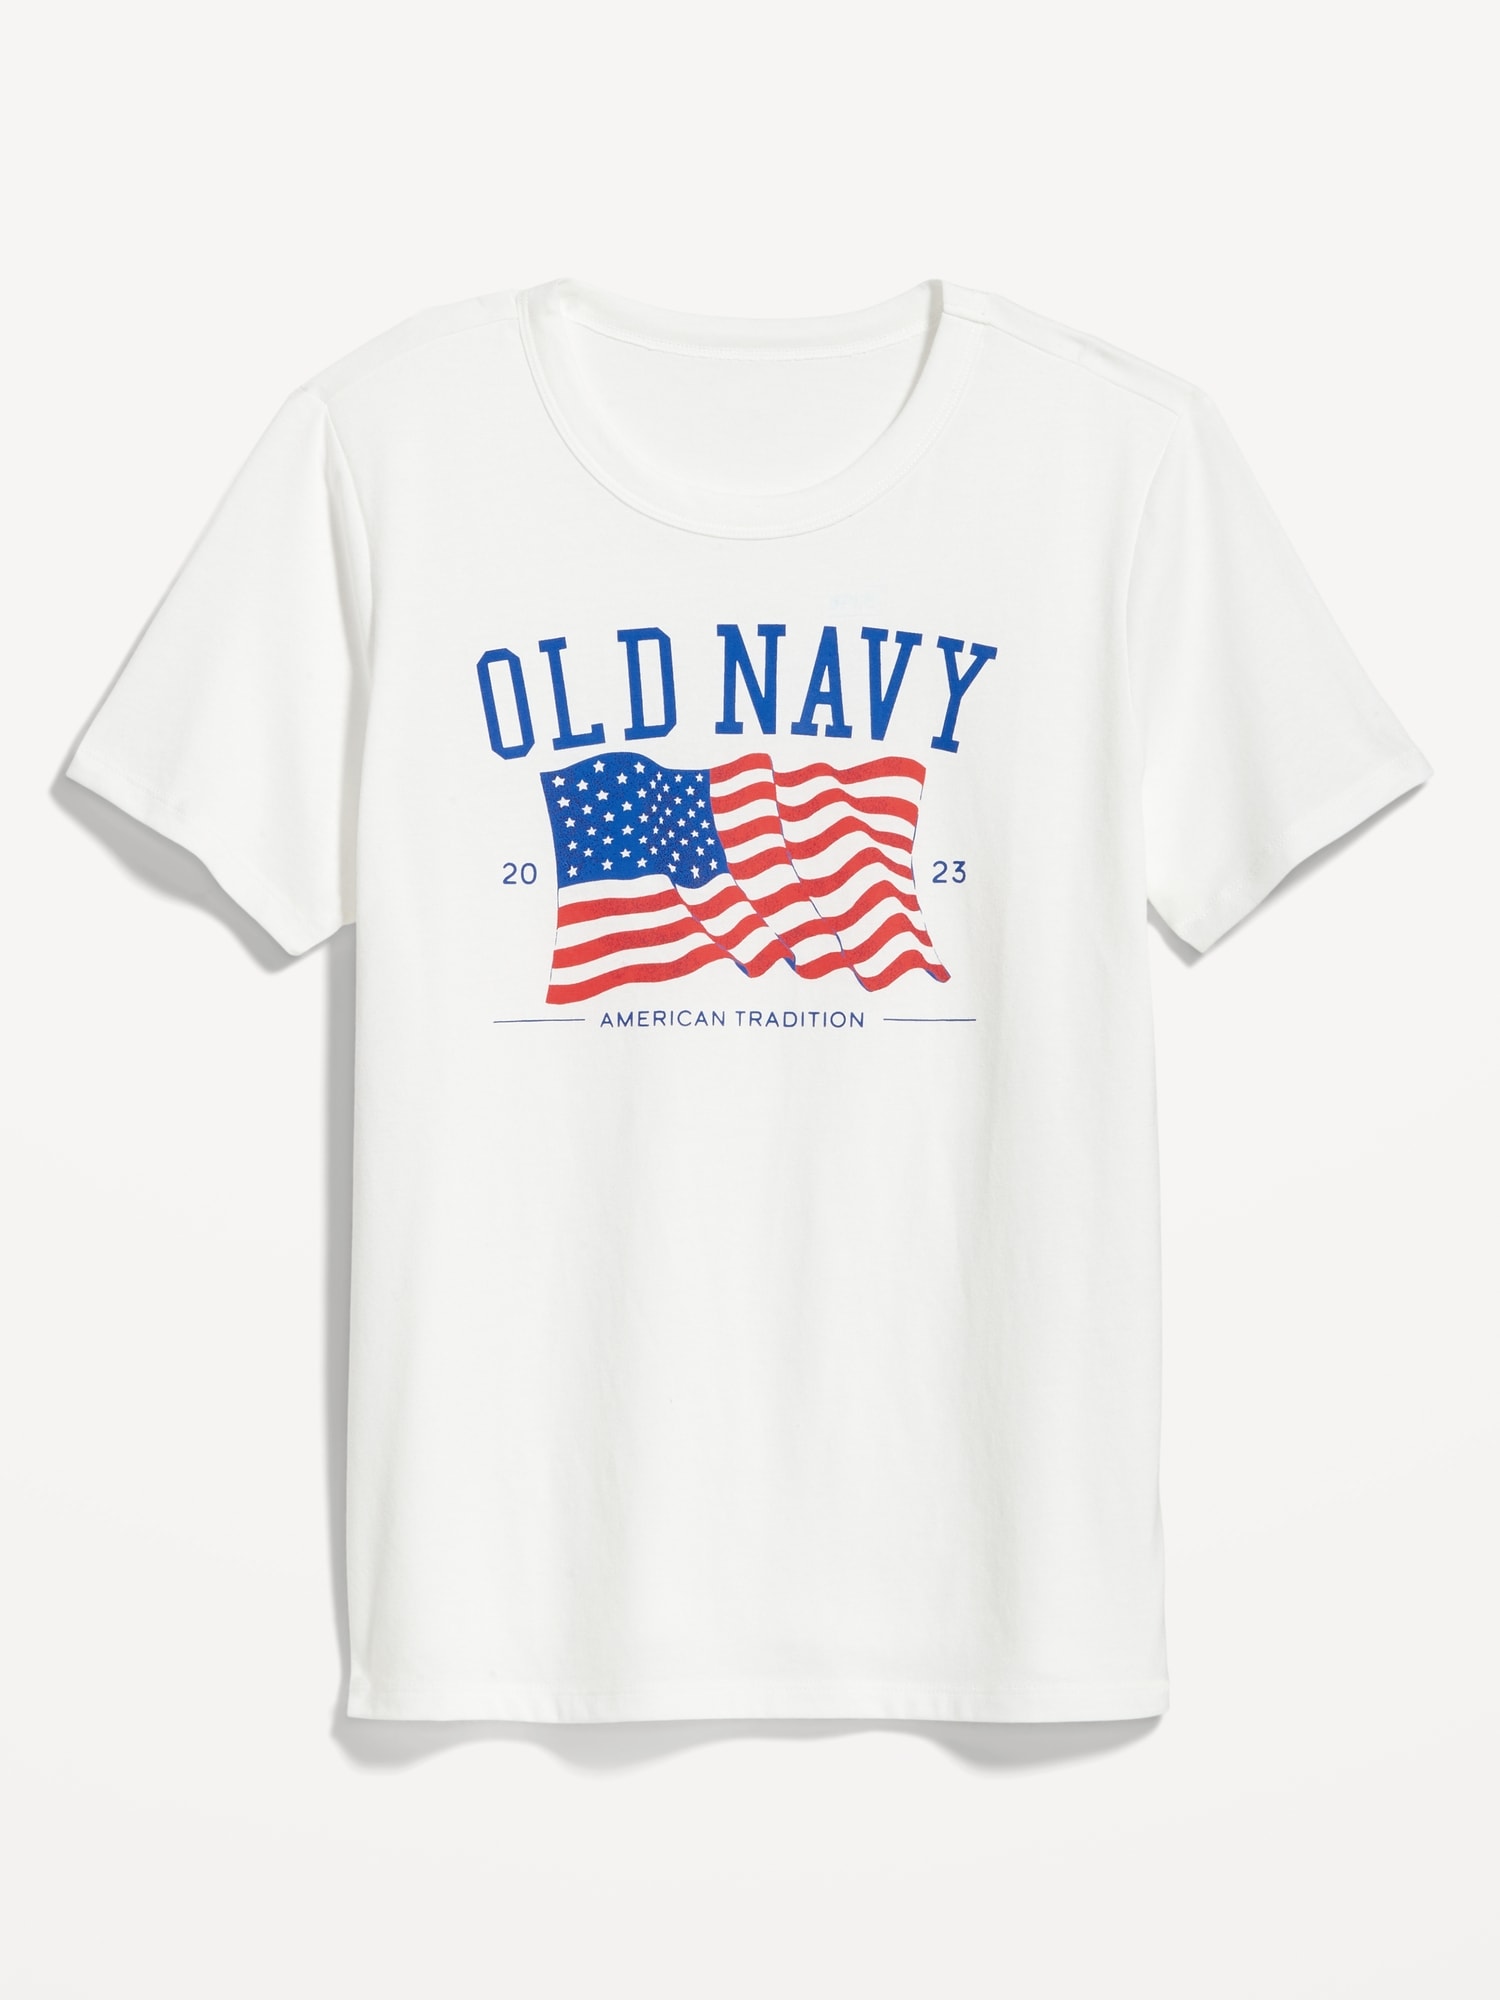 6 Ways to Bling Out Your $5 Old Navy Shirt for the 4th of July